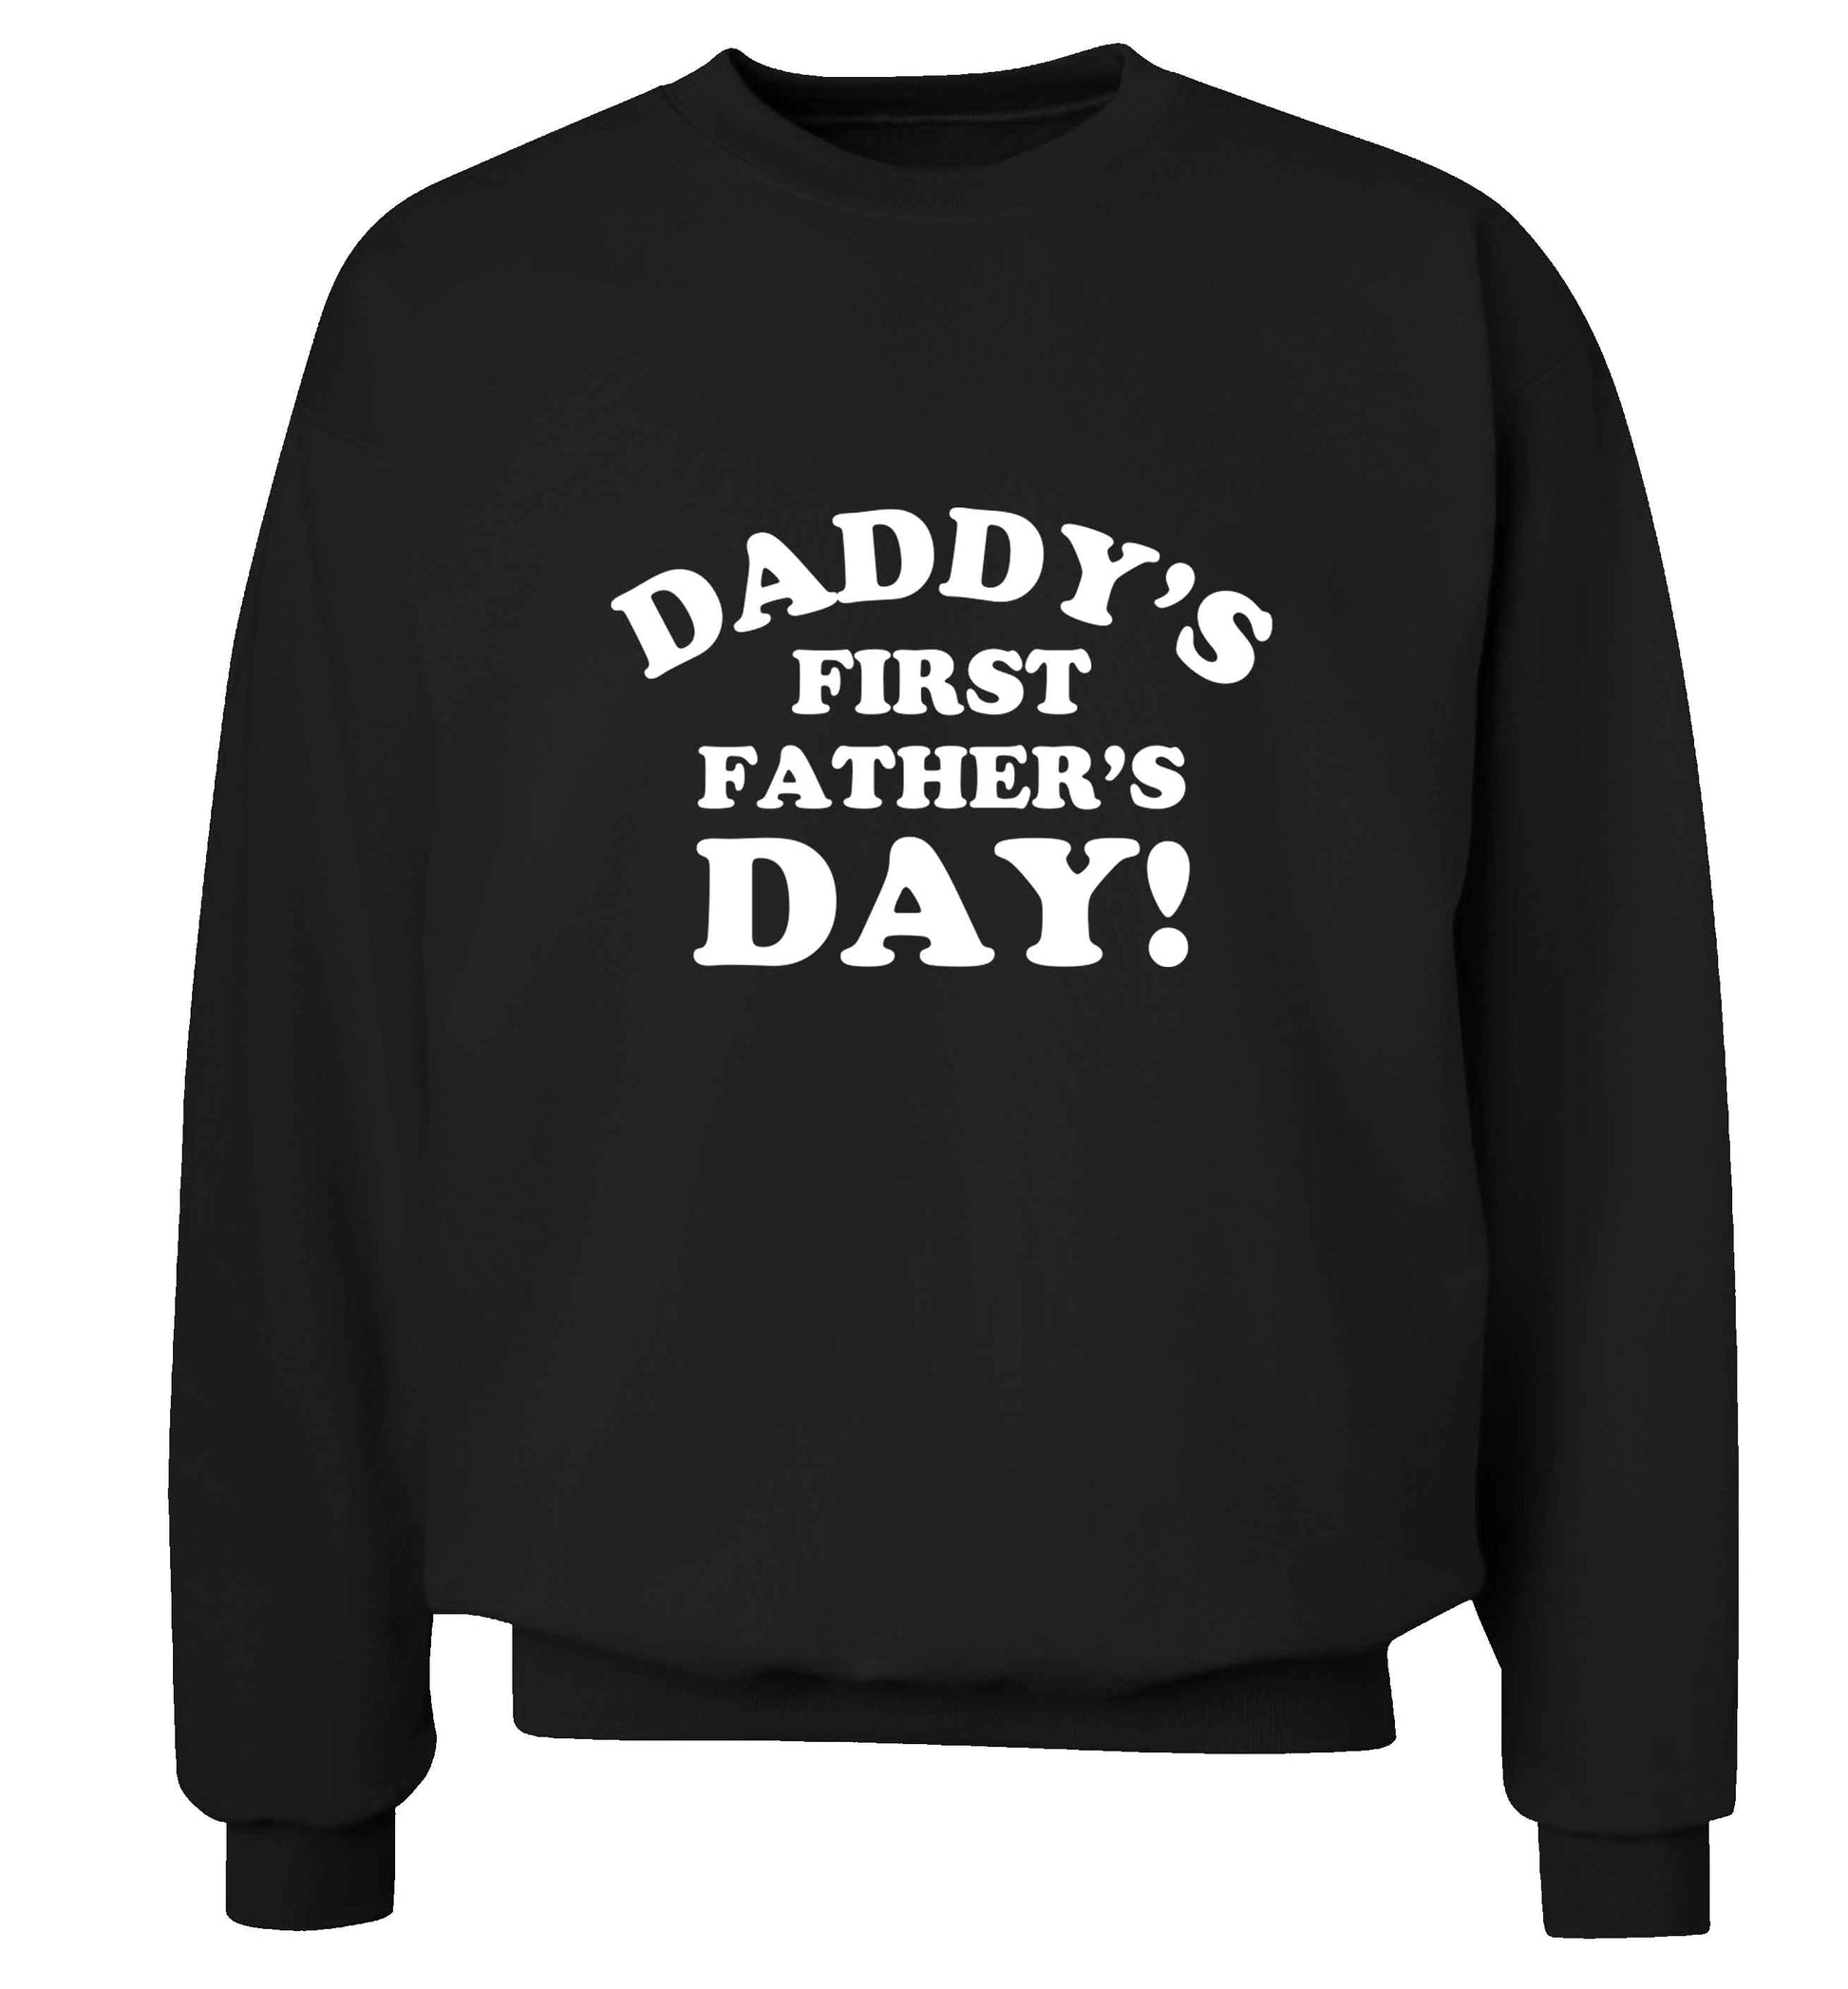 Daddy's first father's day adult's unisex black sweater 2XL